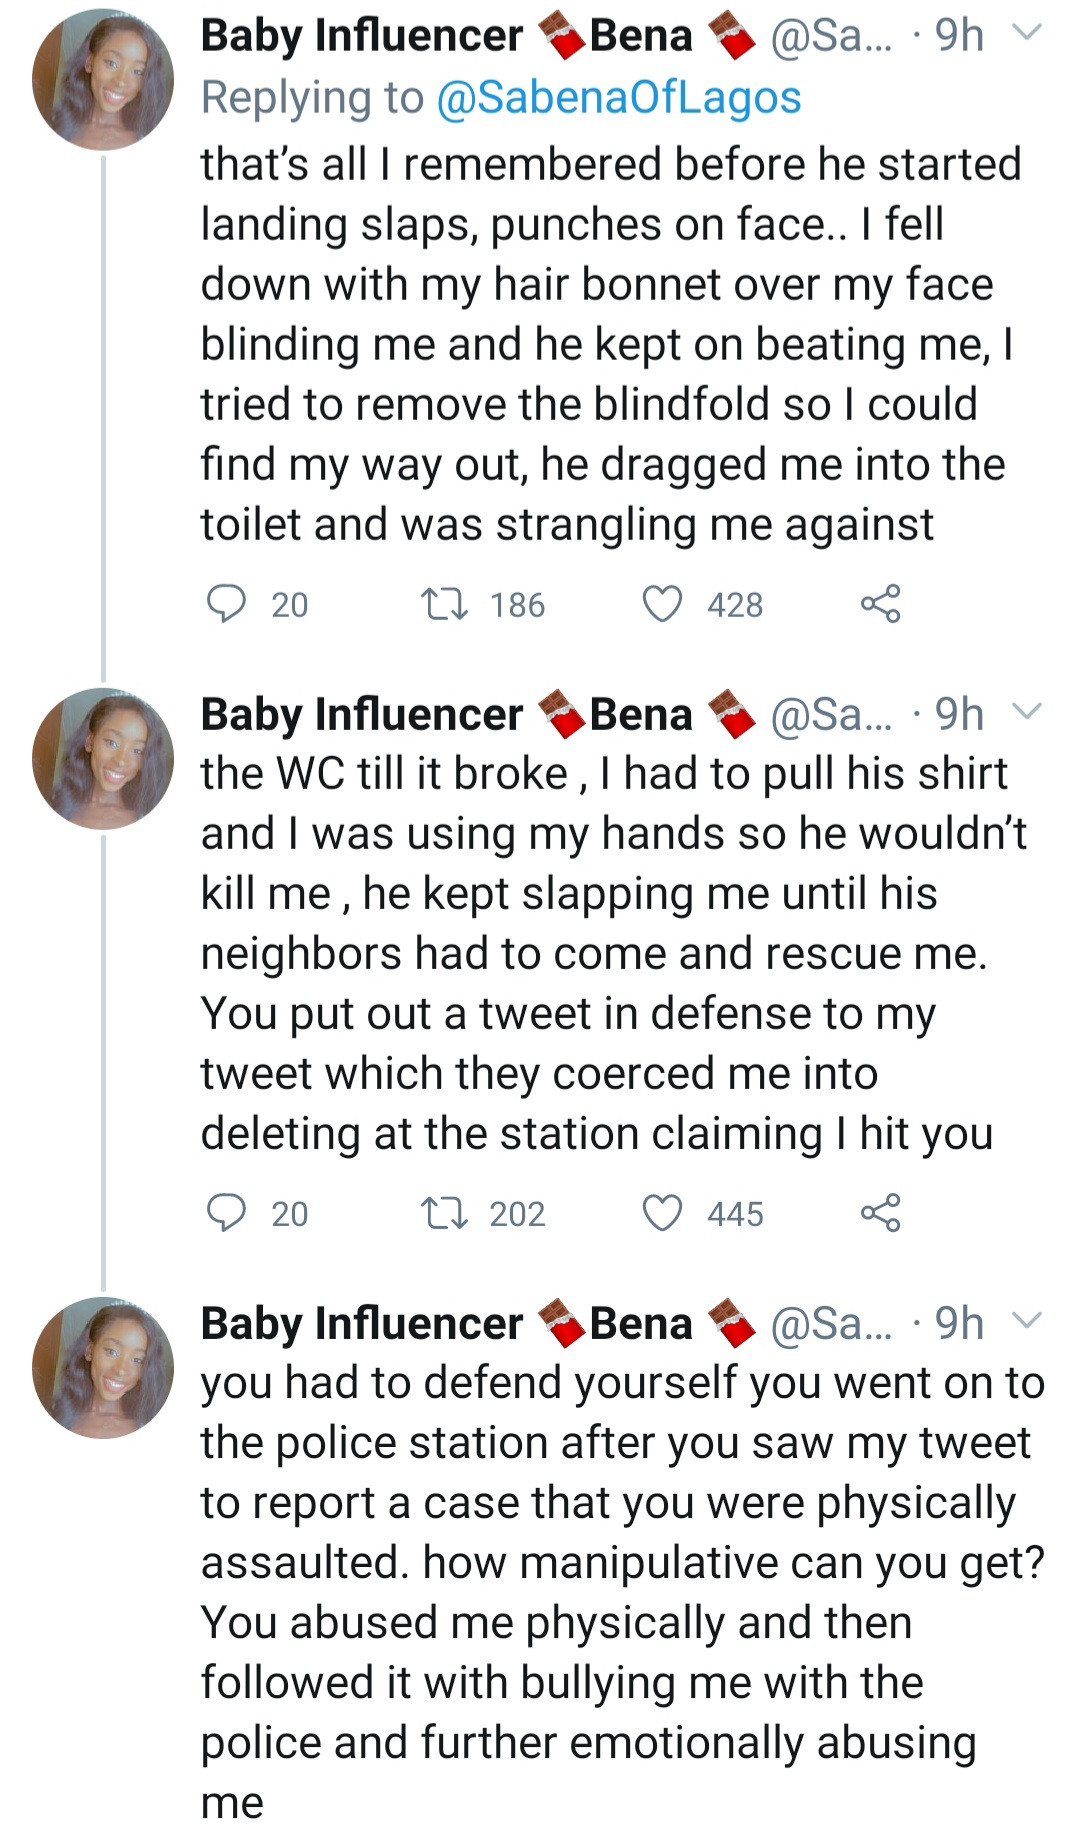 twitter influencer accuses her boyfriend of abusing her and conniving with police to intimidate her he responds with his side of the story 2